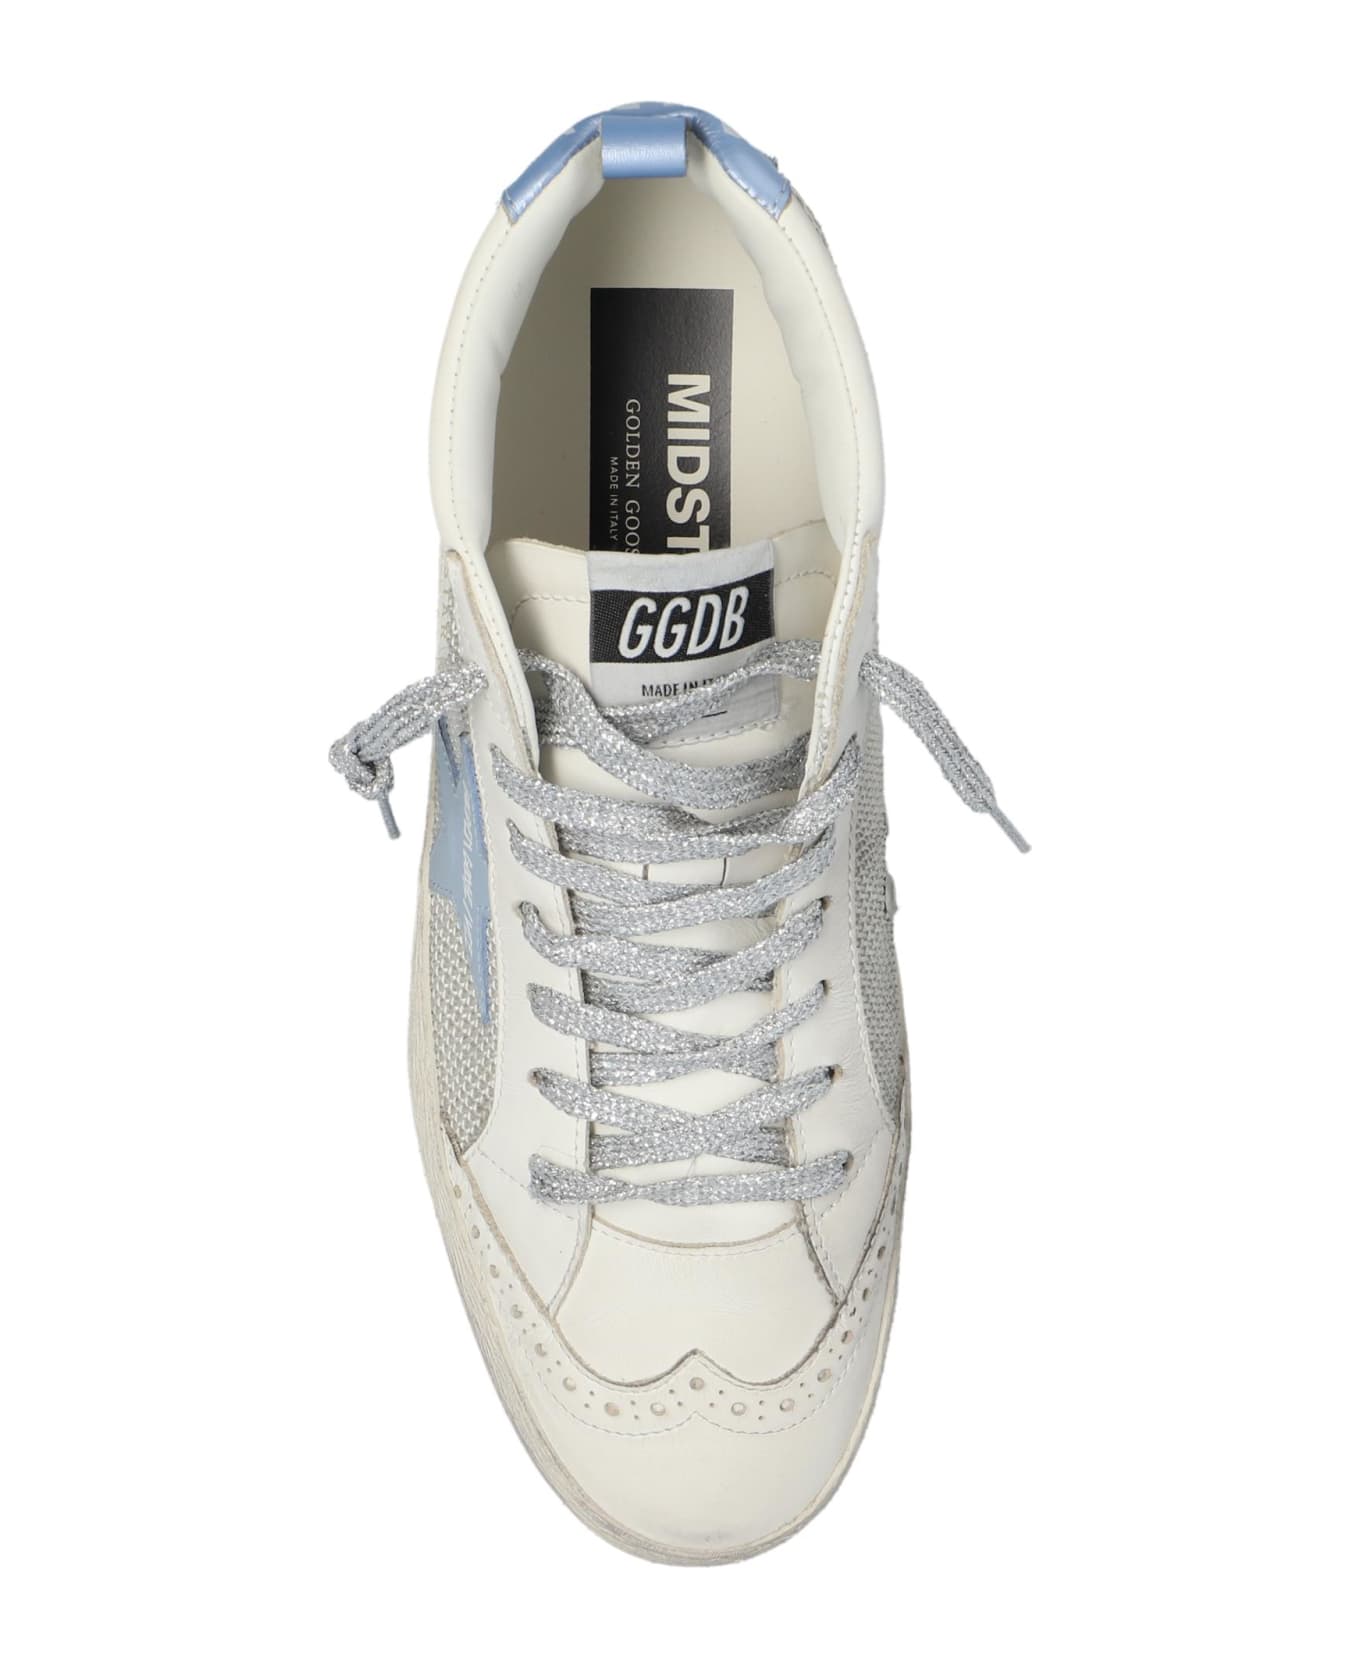 Golden Goose Mid Star Classic High-top Sneakers - White スニーカー